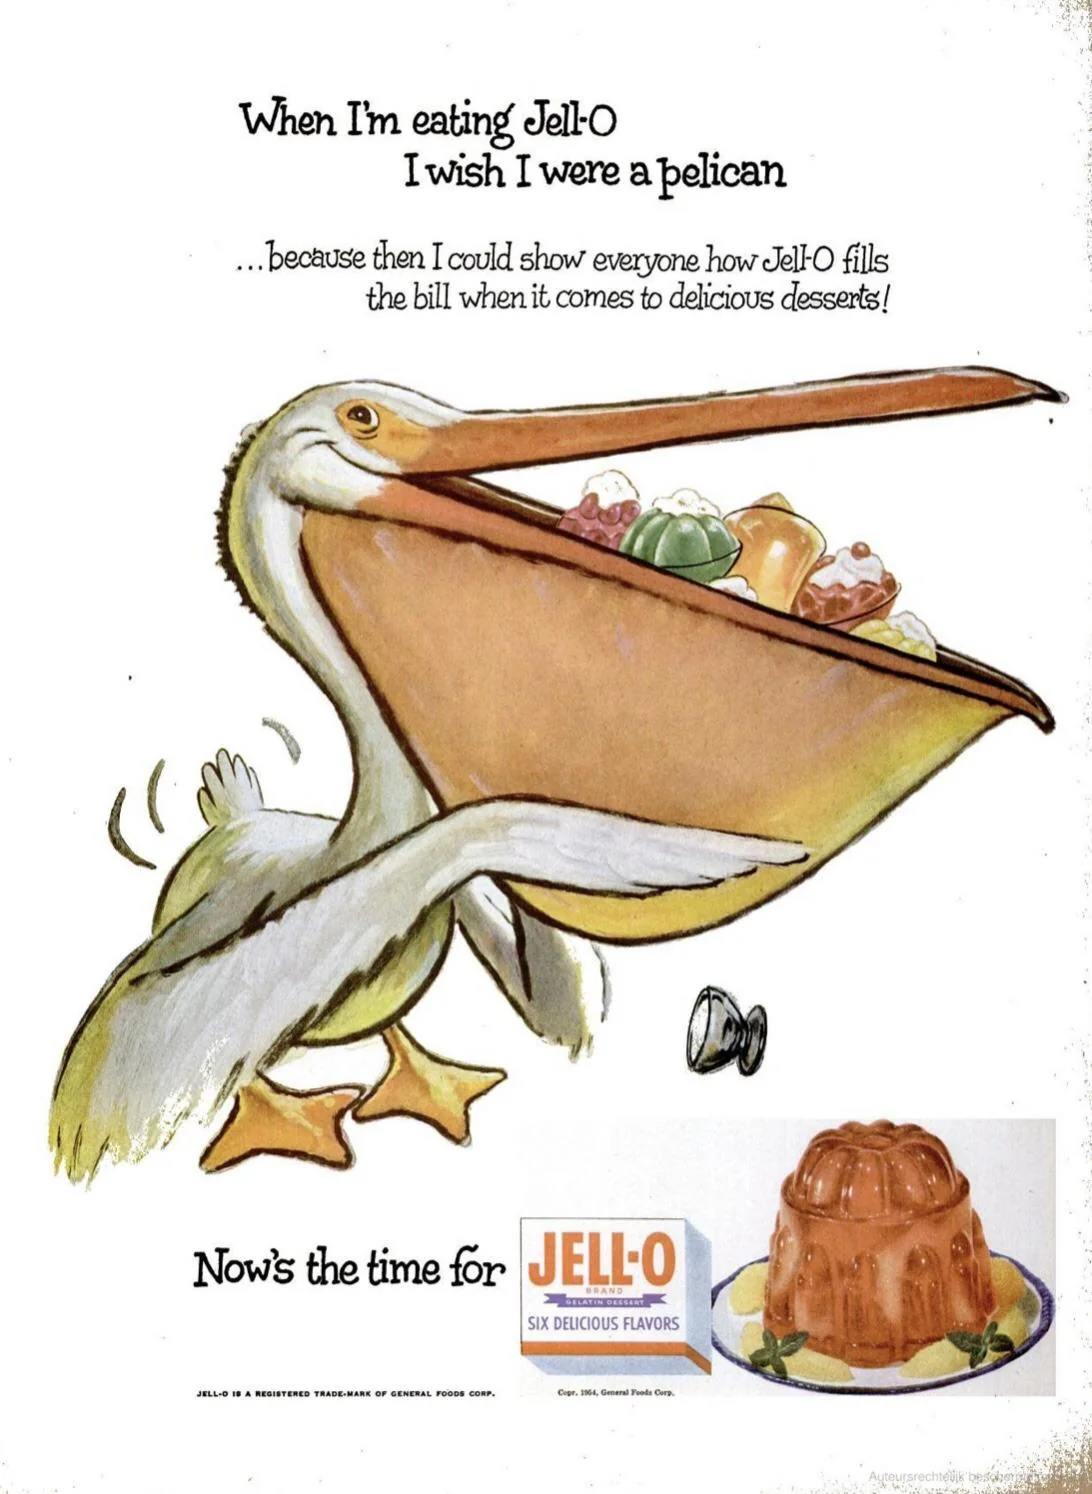 When I'm eating dell O I wish I were a pelican because then I could show everyone how JellO fills the bill when it comes to delicious desserts!